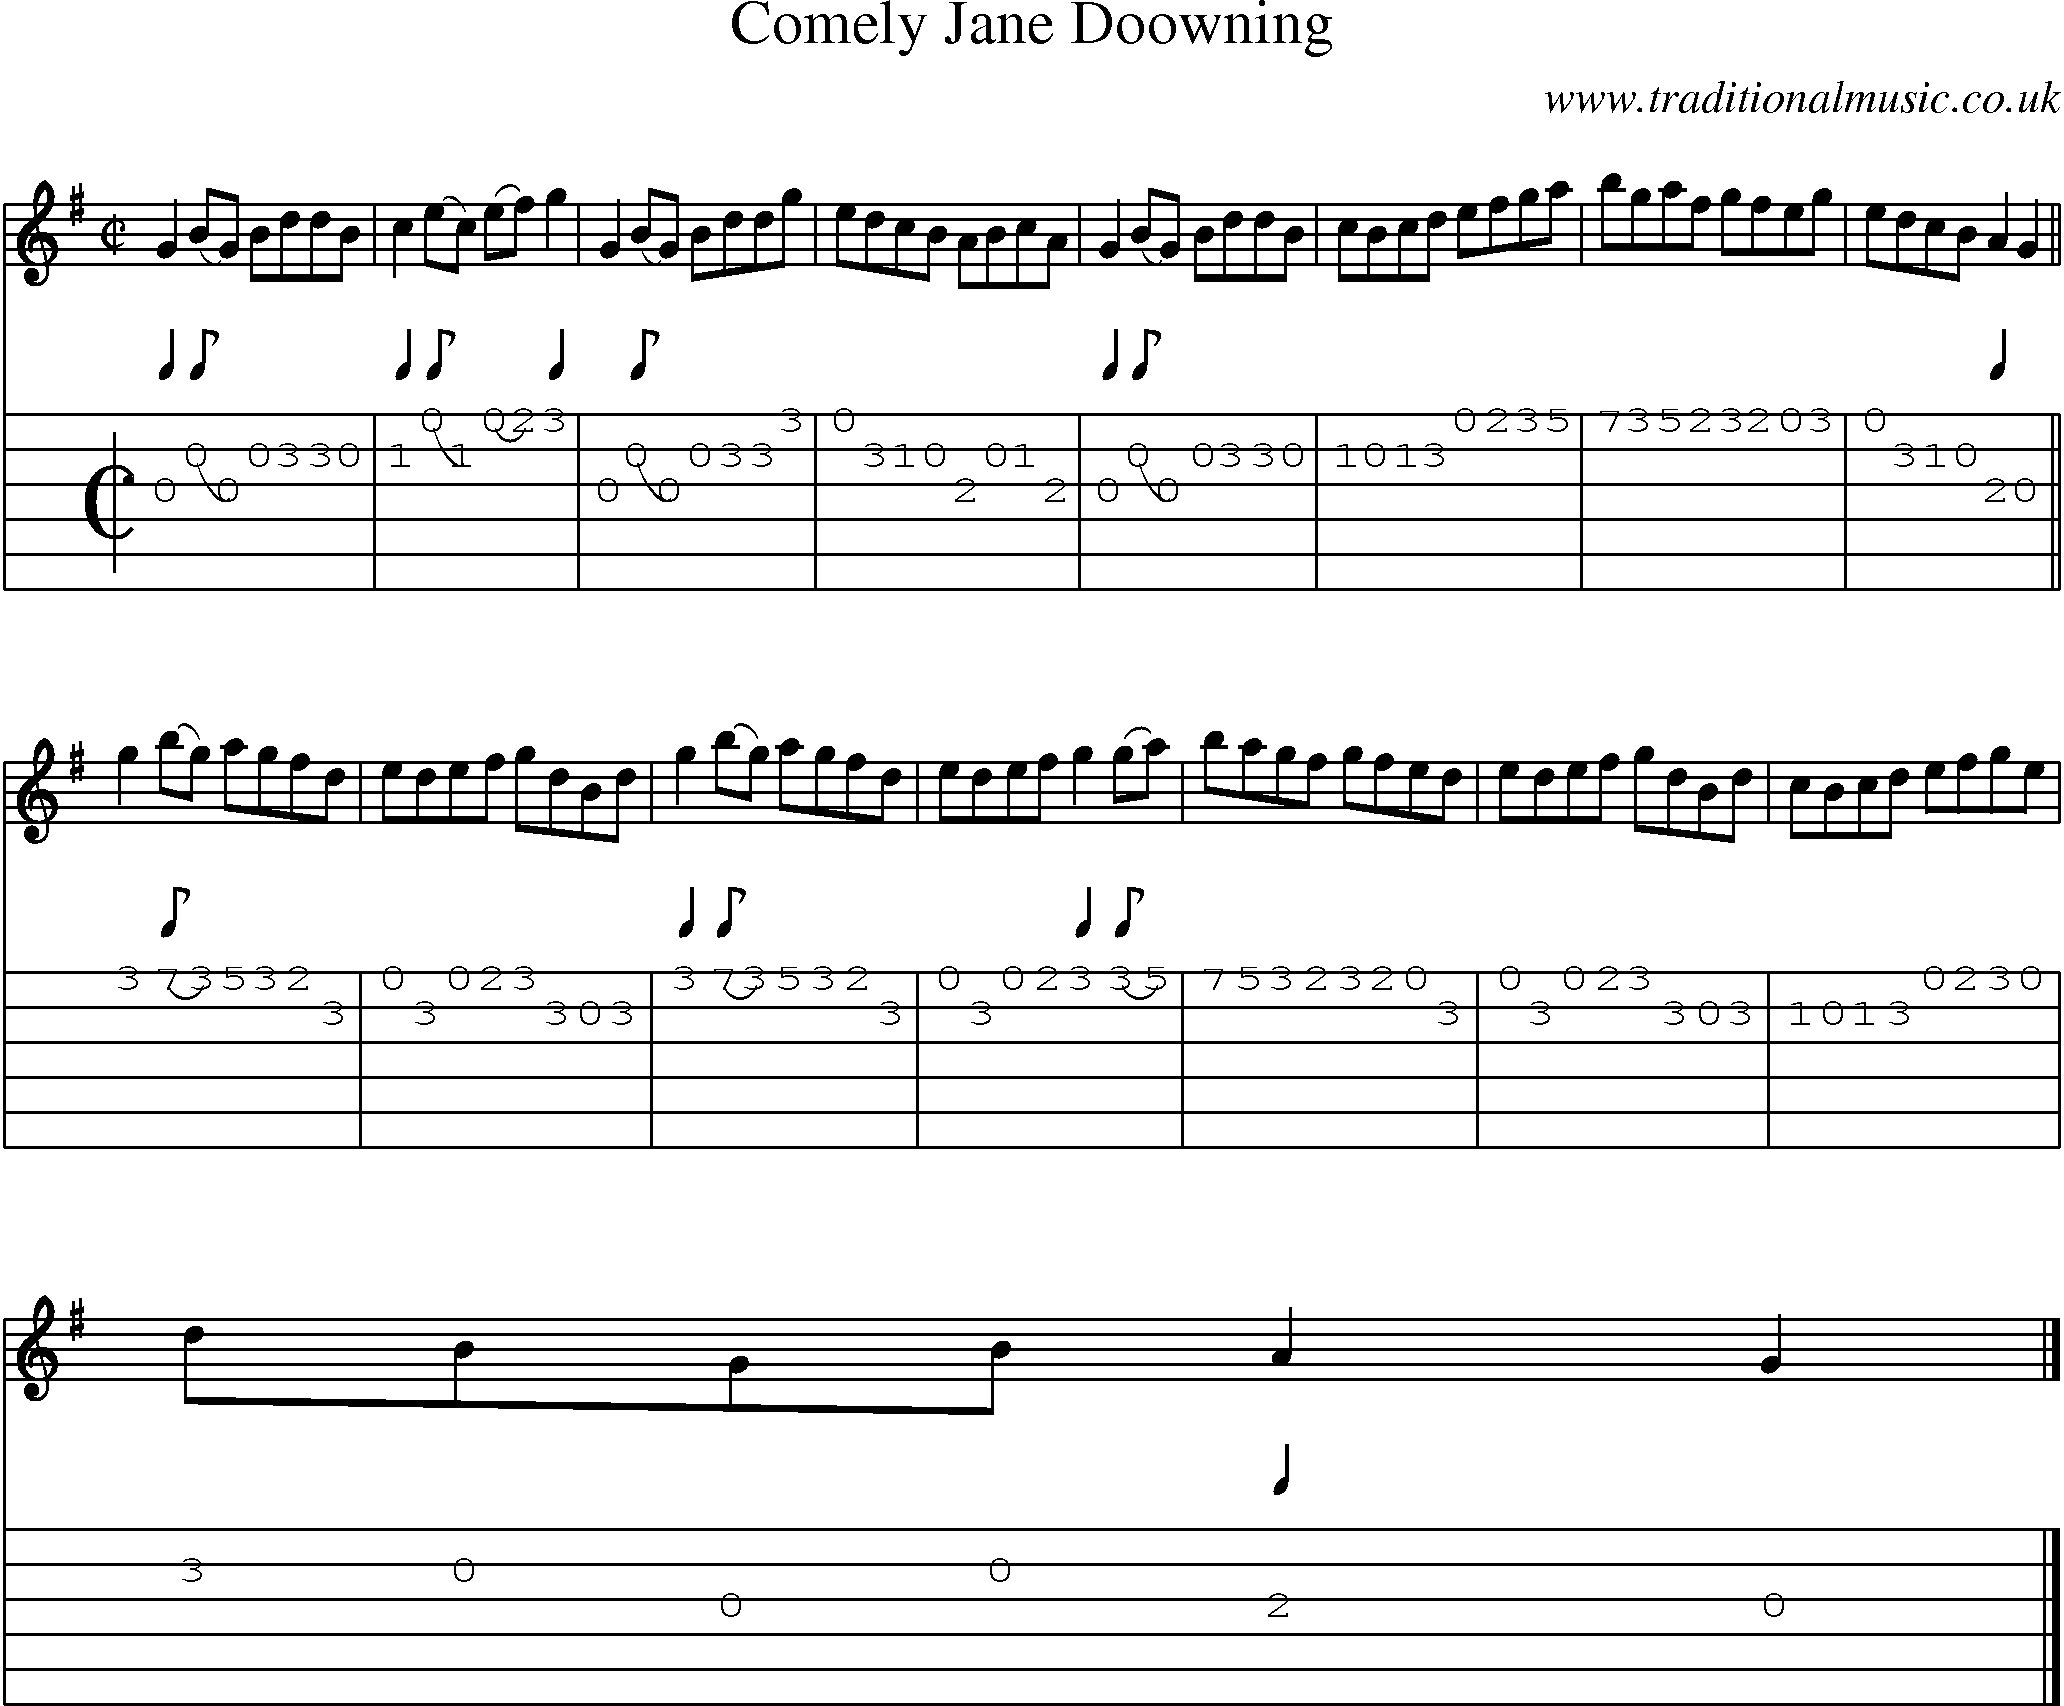 Music Score and Guitar Tabs for Comely Jane Doowning